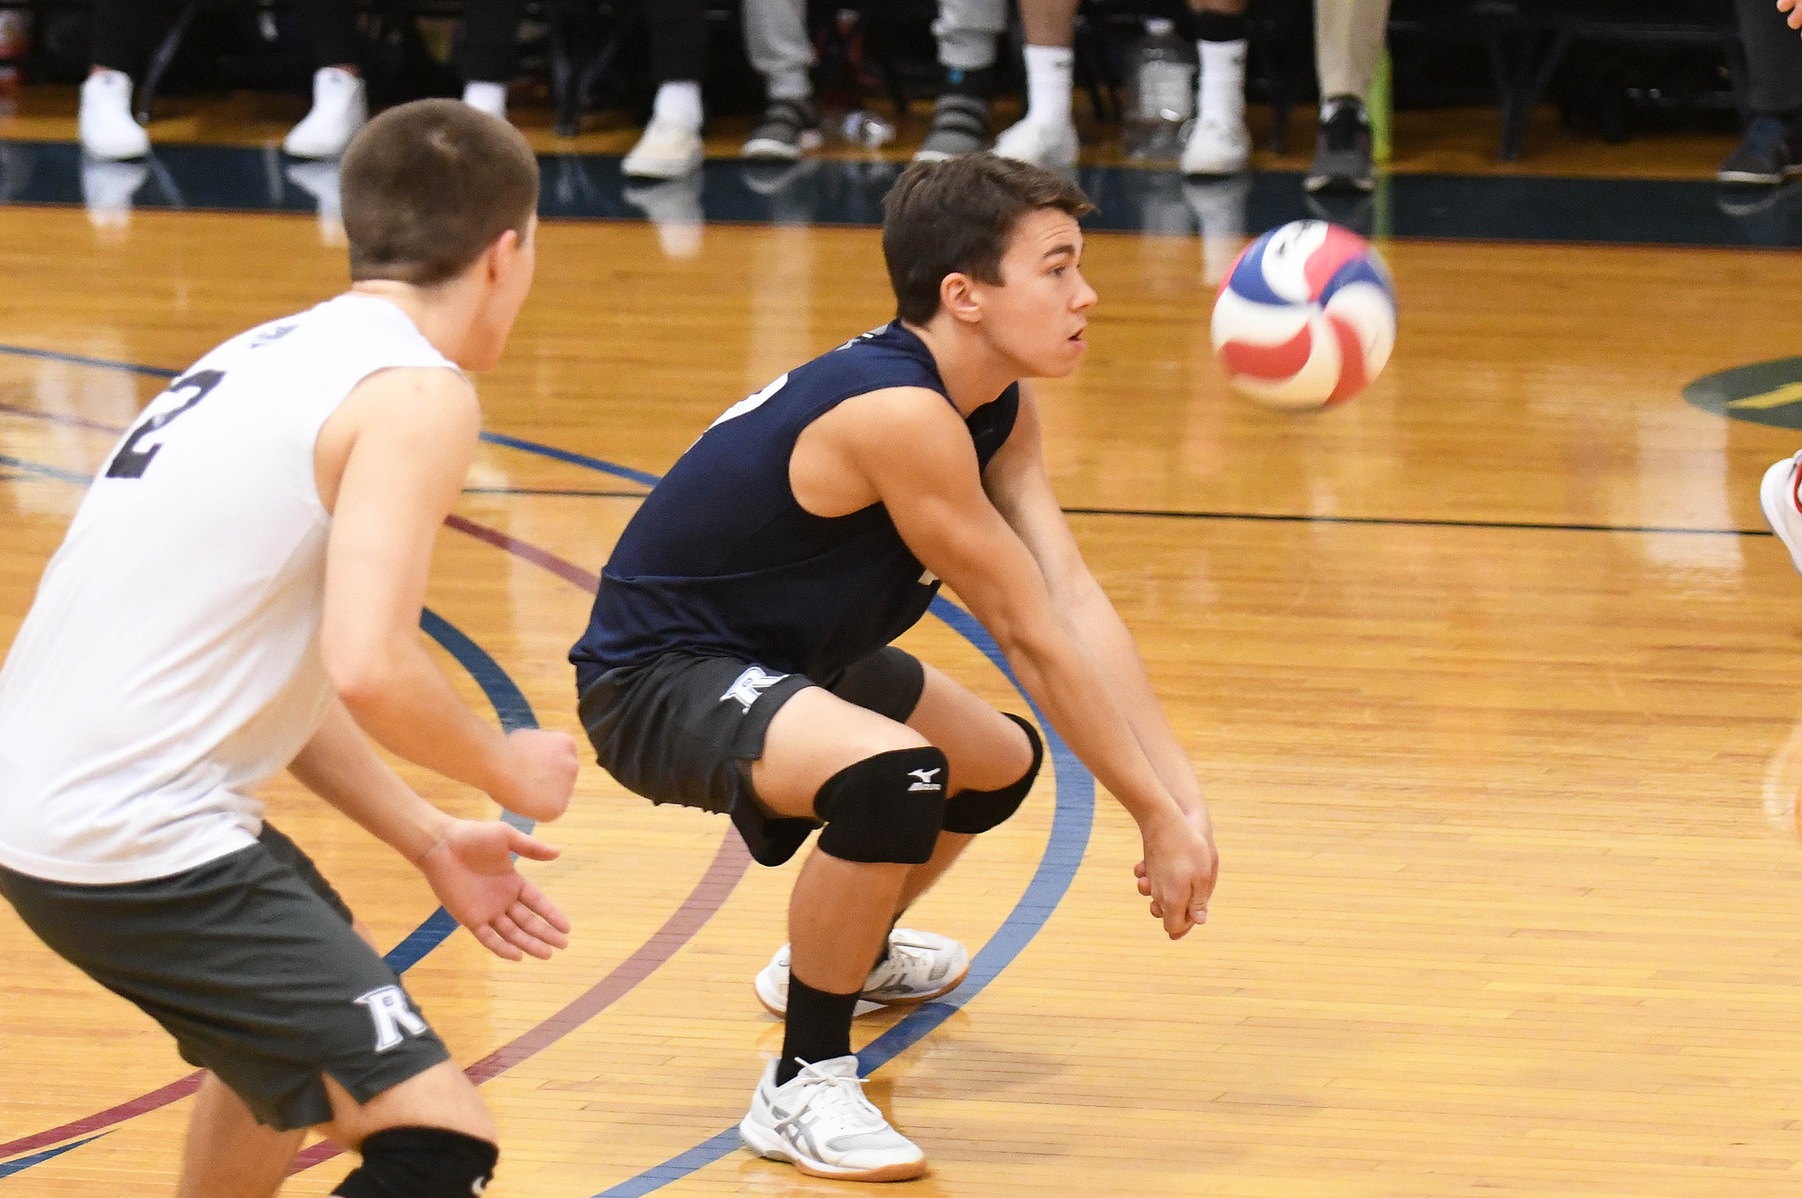 Men's Volleyball: Raiders blank the Mavericks 3-0 to set the tone for today's tri-match.